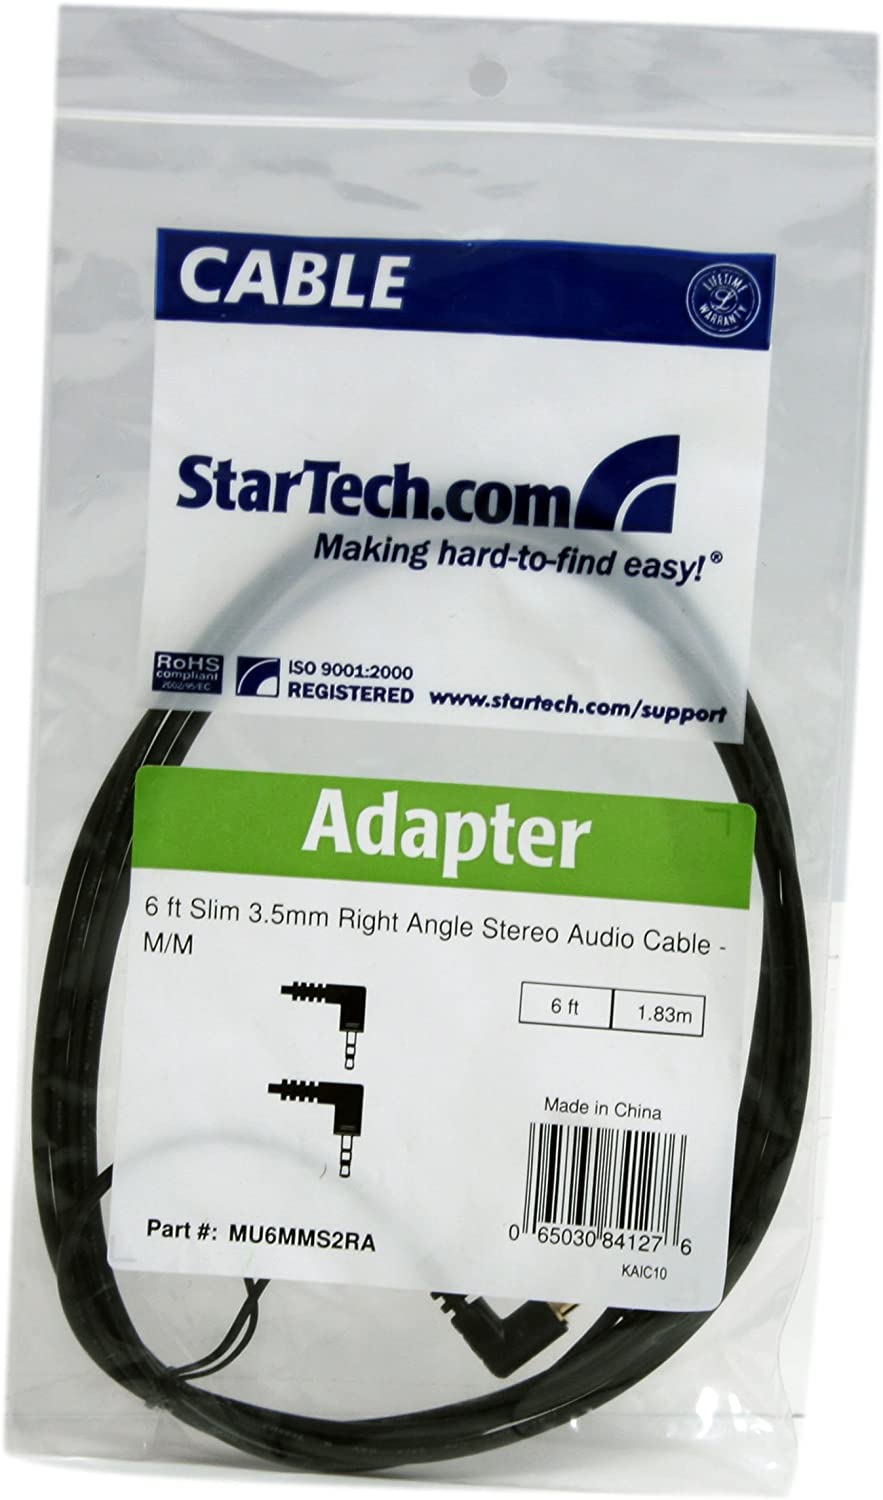 StarTech.com 6 ft. (1.8 m) Right Angle 3.5 mm Audio Cable - 3.5mm Slim Audio Cable - Right Angle - Male/Male - Aux Cable (MU6MMS2RA), Black 6 ft 2 Angled Connector Audio Cable